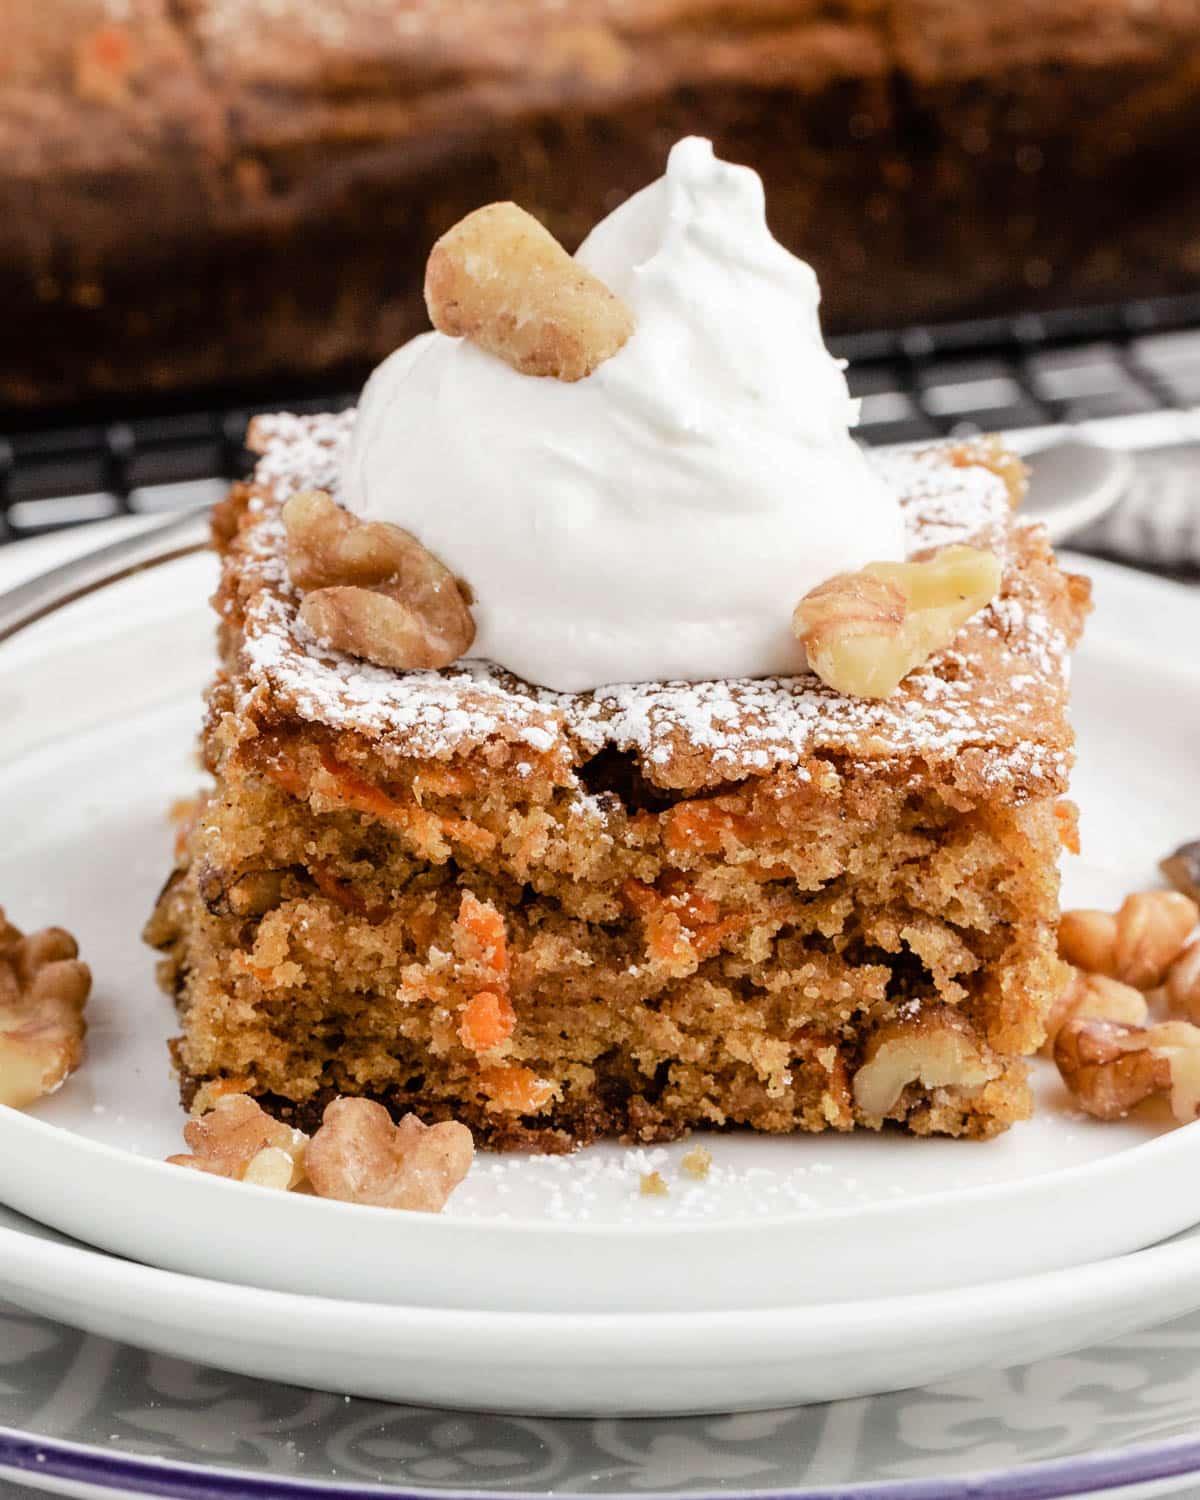 a piece of carrot cake sitting on a plate with whipped cream and walnuts